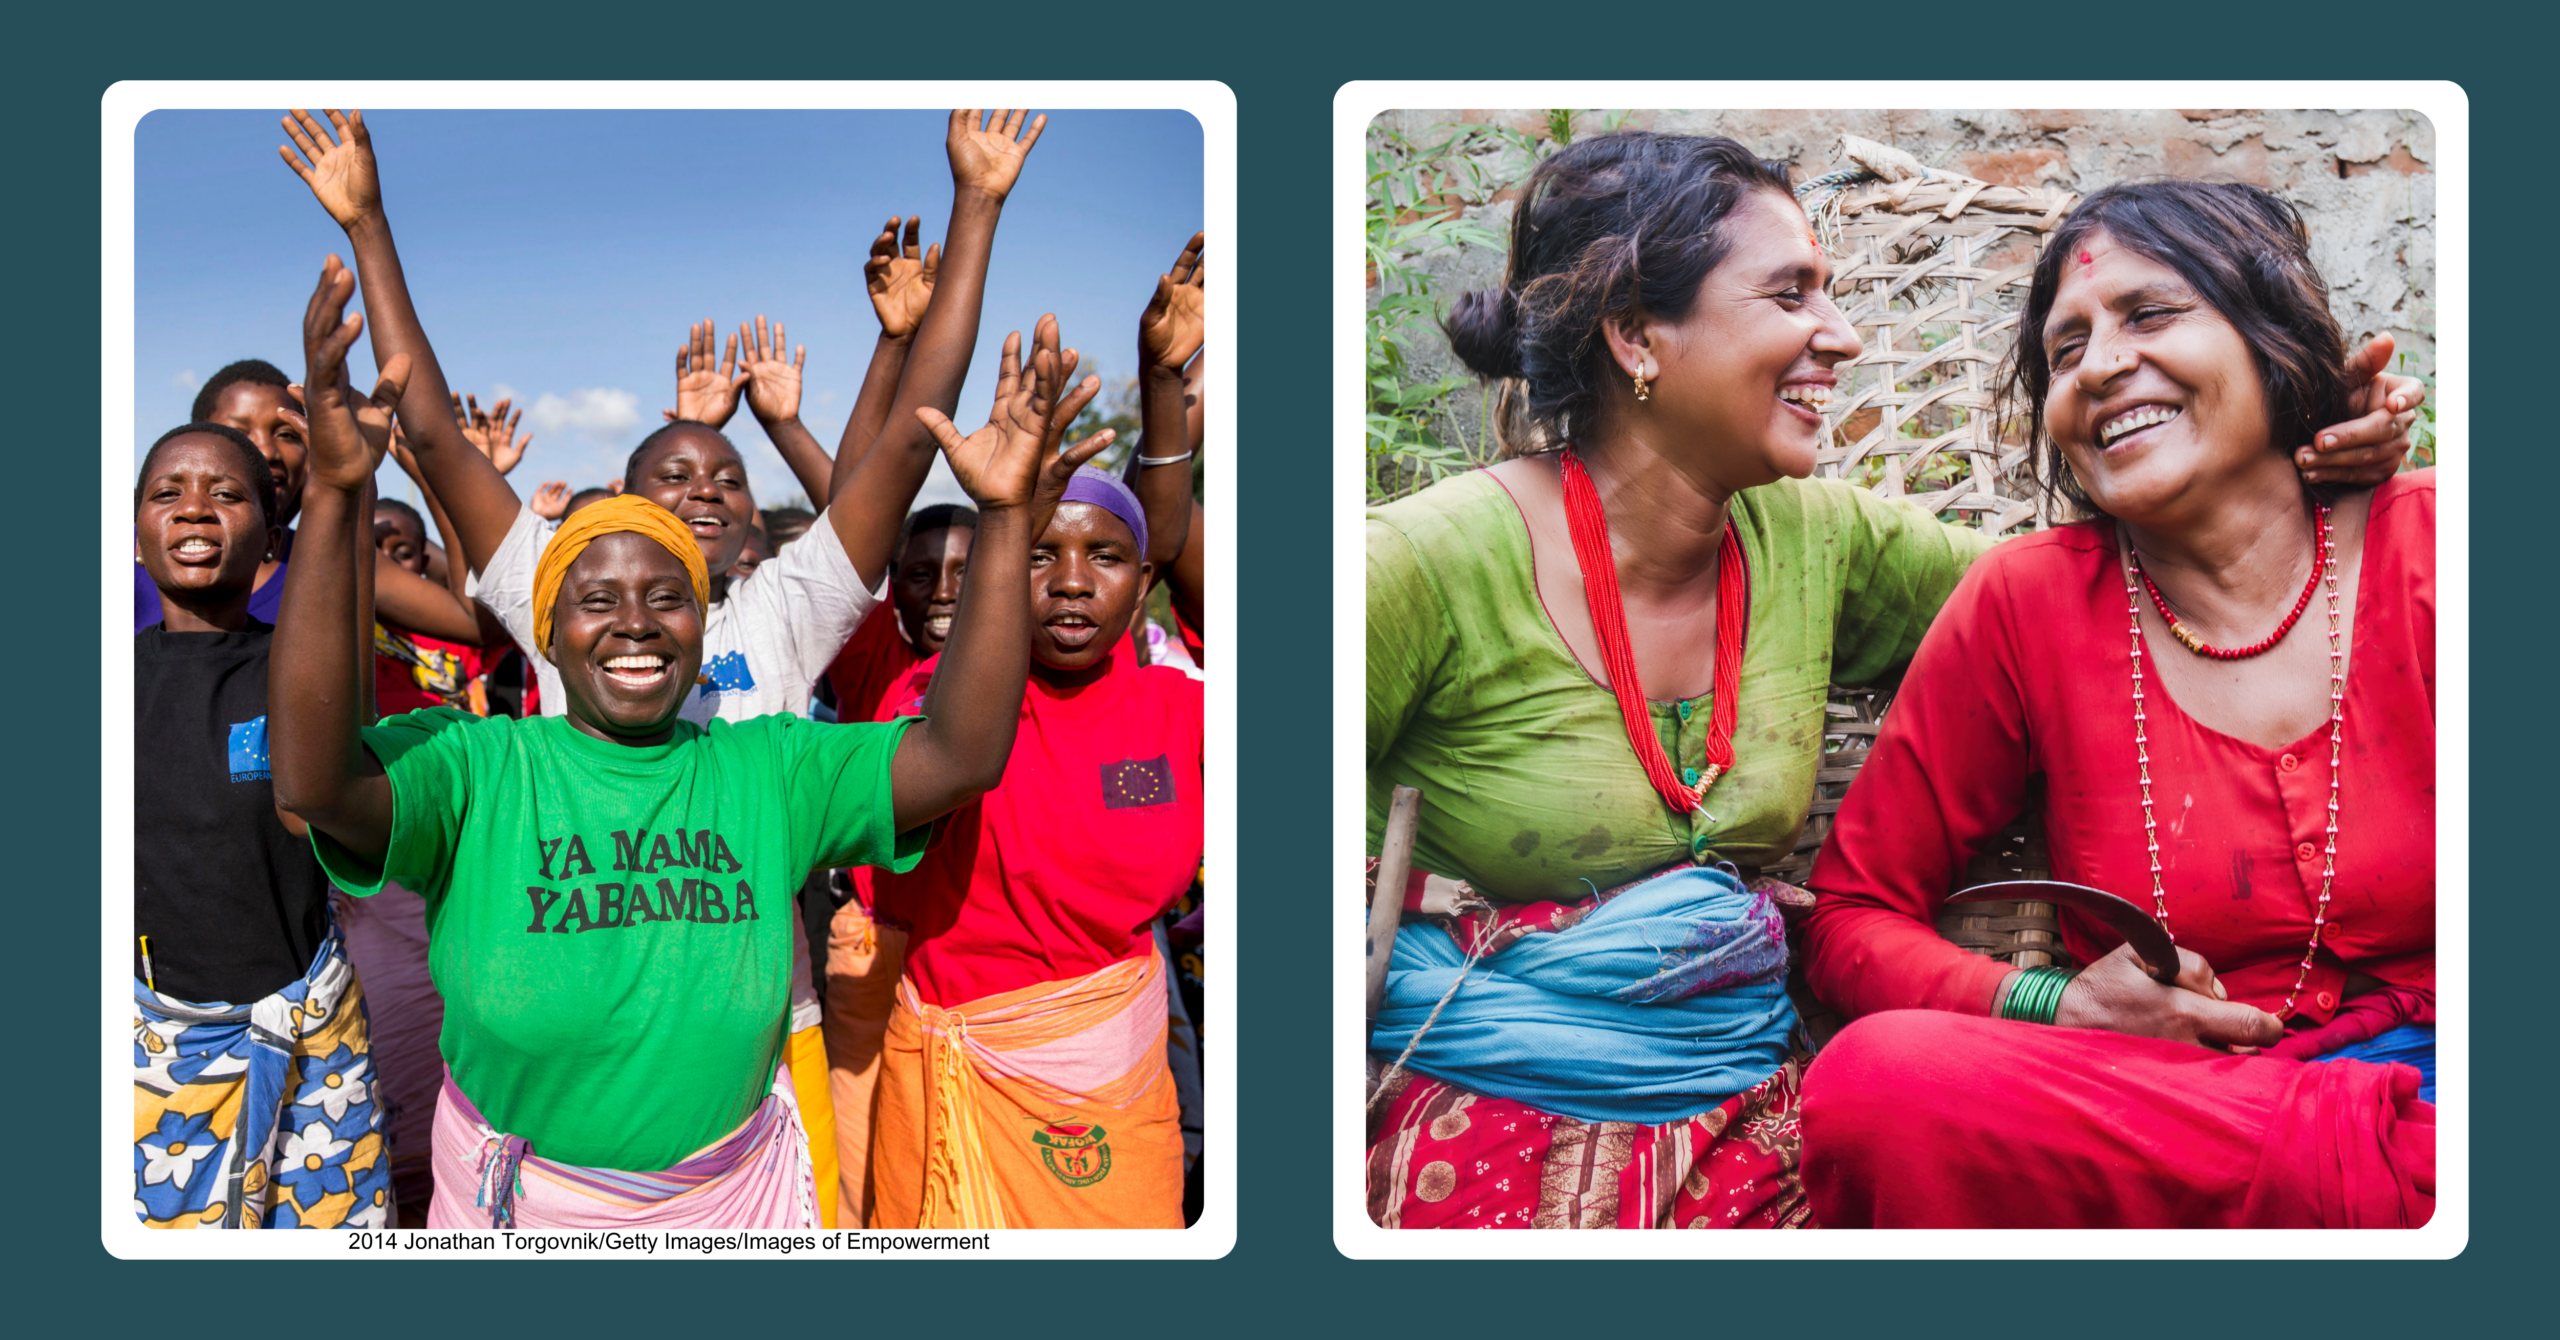 One photo showing a group of smiling women from Kenya, and one photo showing two smiling women from Nepal.